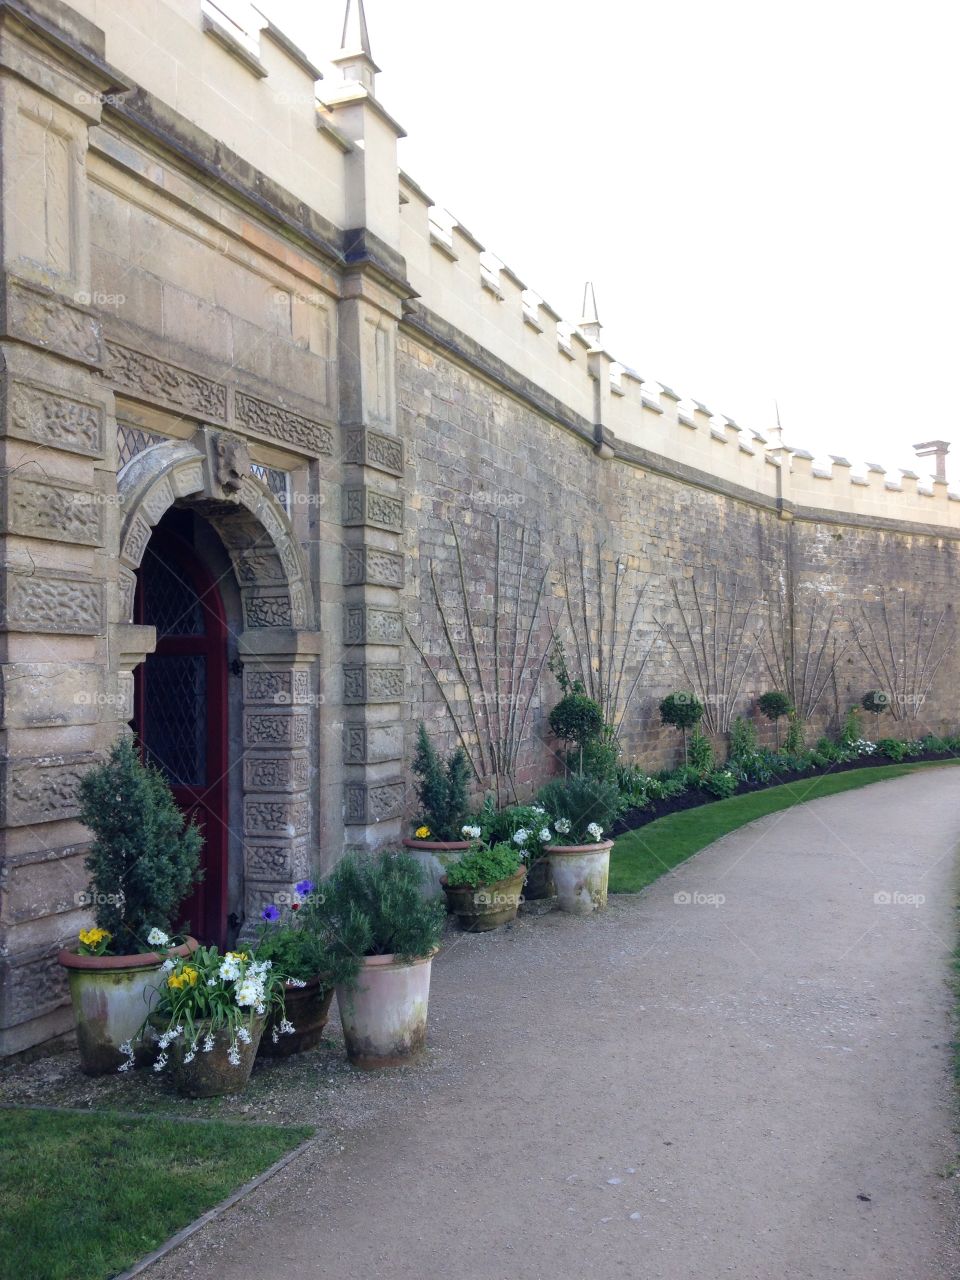 Battlement topped wall with plants and archway to garden at Bolsover Castle in Derbyshire